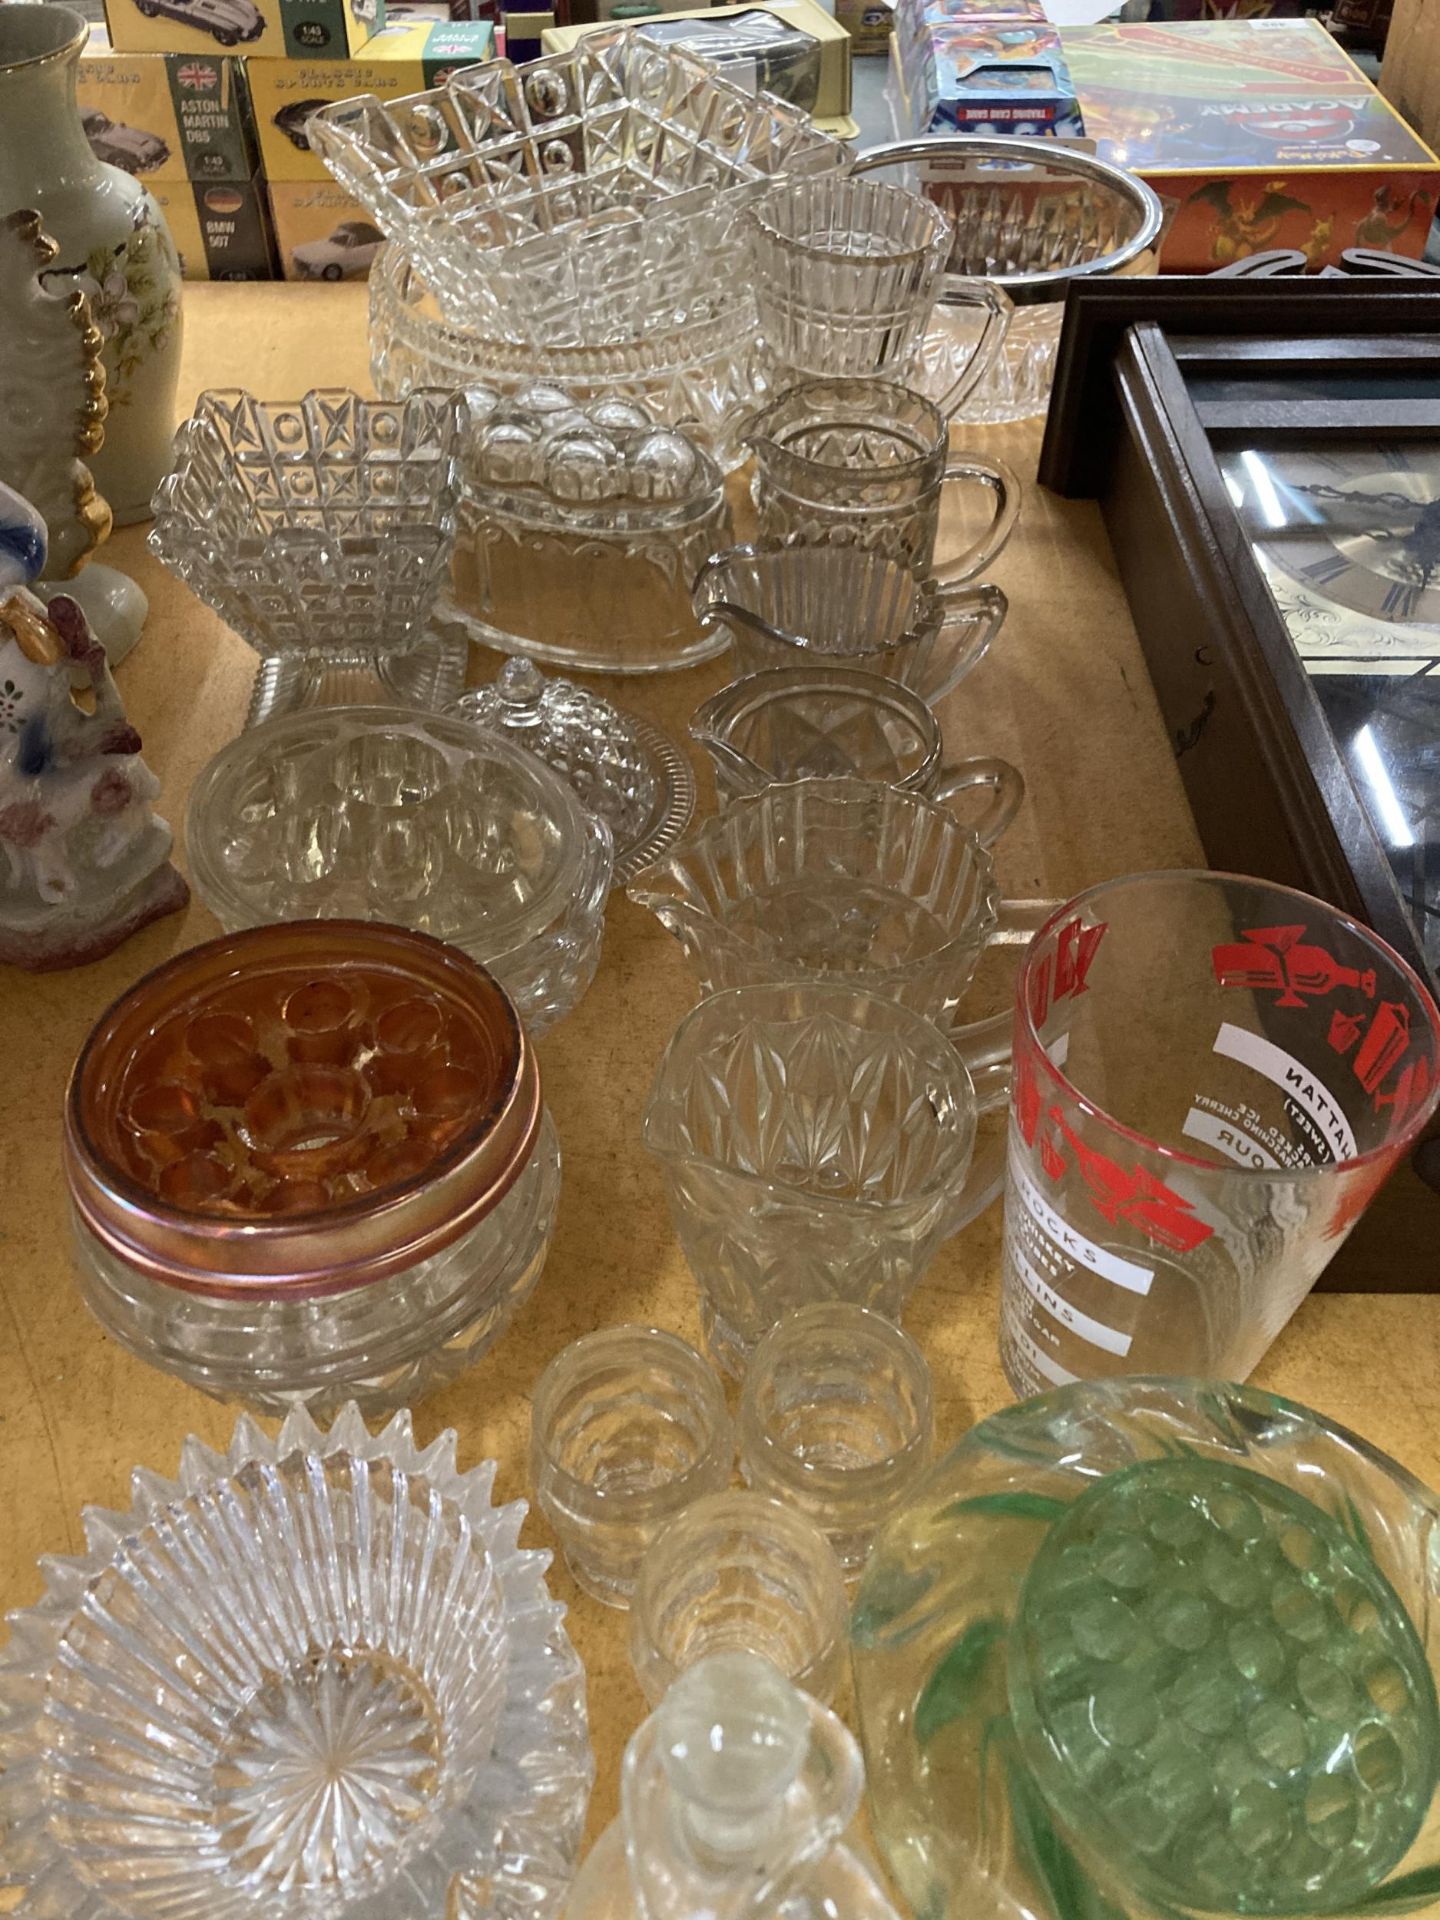 A LARGE QUANTITY OF VINTAGE GLASSWARE TO INCLUDE BOWLS, JUGS, A JELLY MOULD, ETC - Image 3 of 4